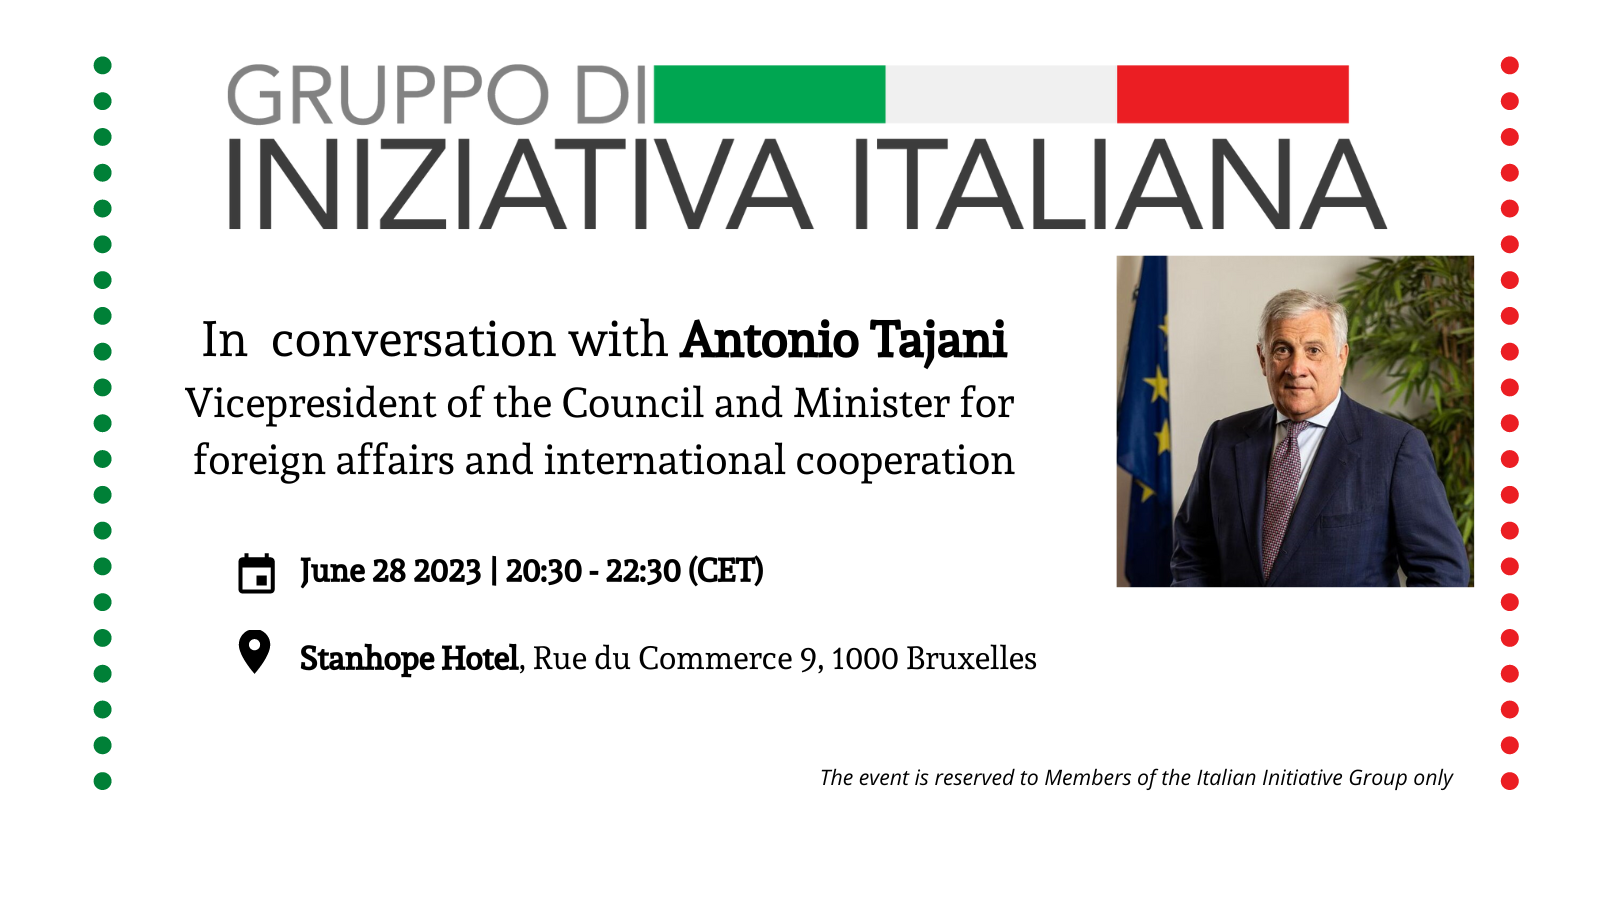 In conversation with Antonio Tajani | Vicepresident of the Council of Ministers and Minister for foreign affairs and international cooperation